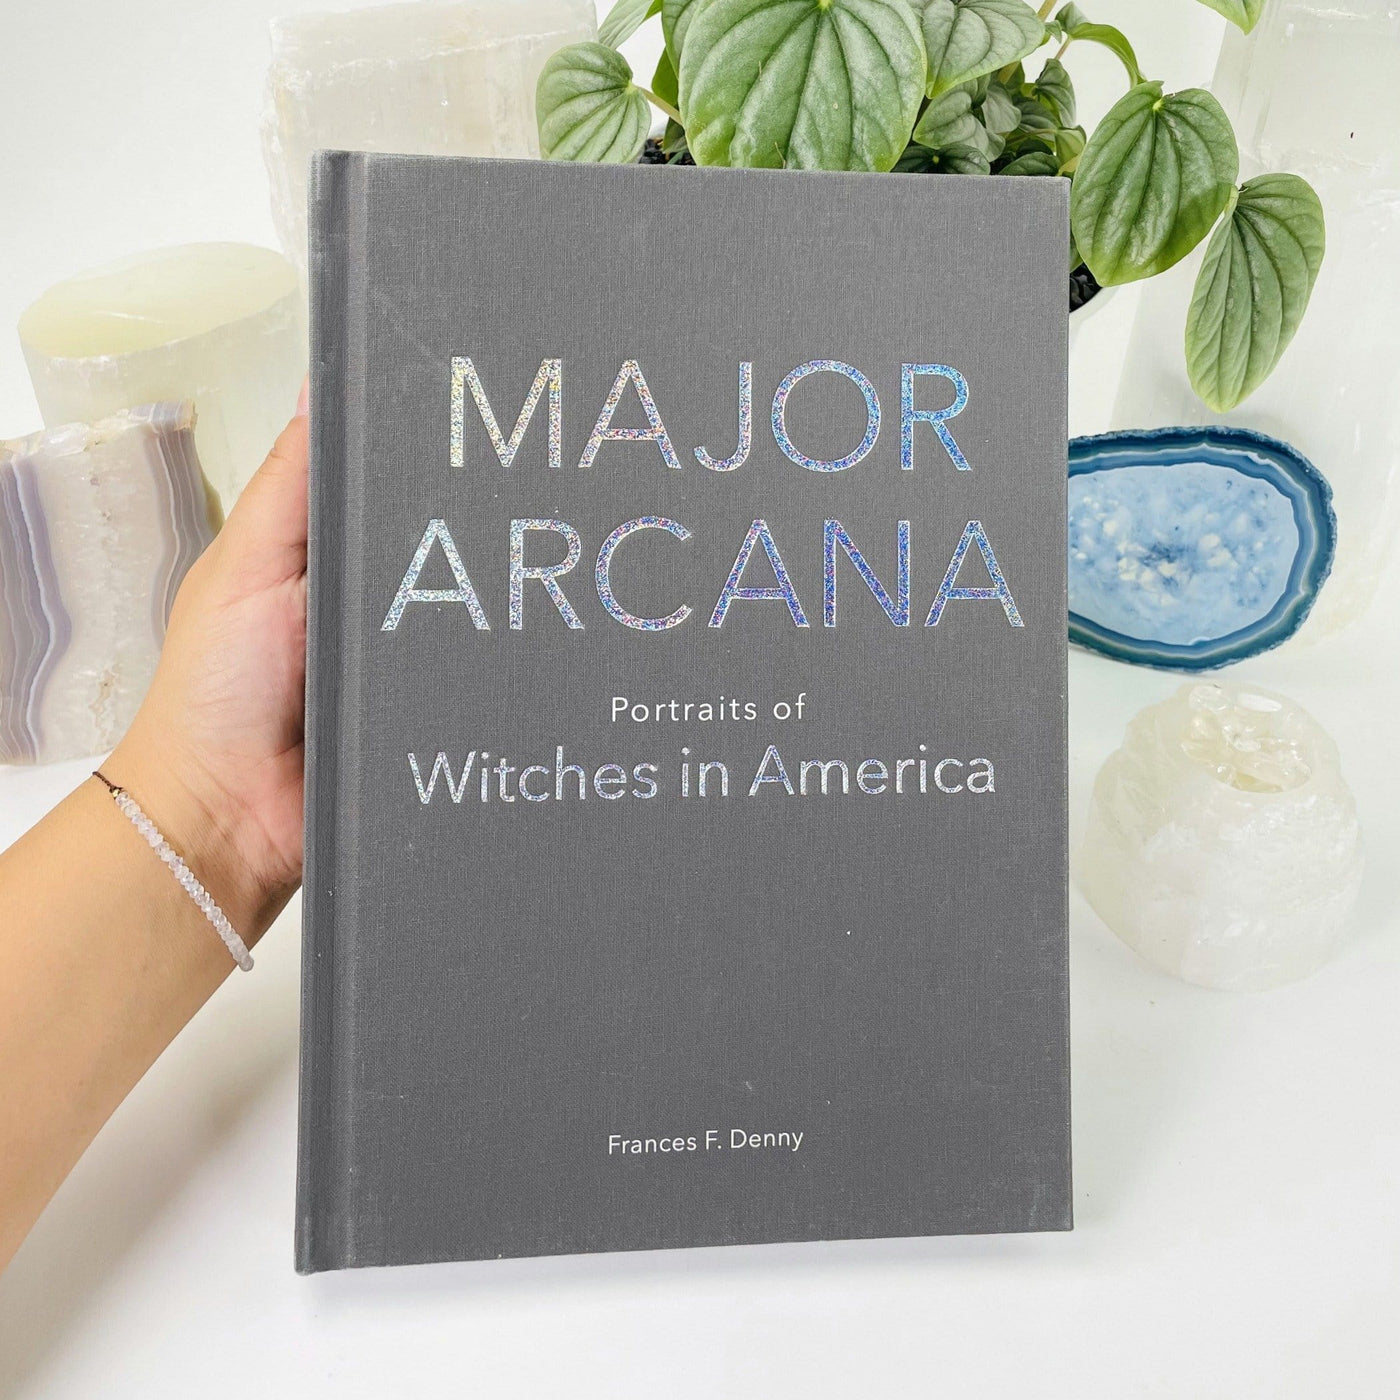 Major Arcana Portraits of Witches in America by Frances F. Denny with decorations in the background